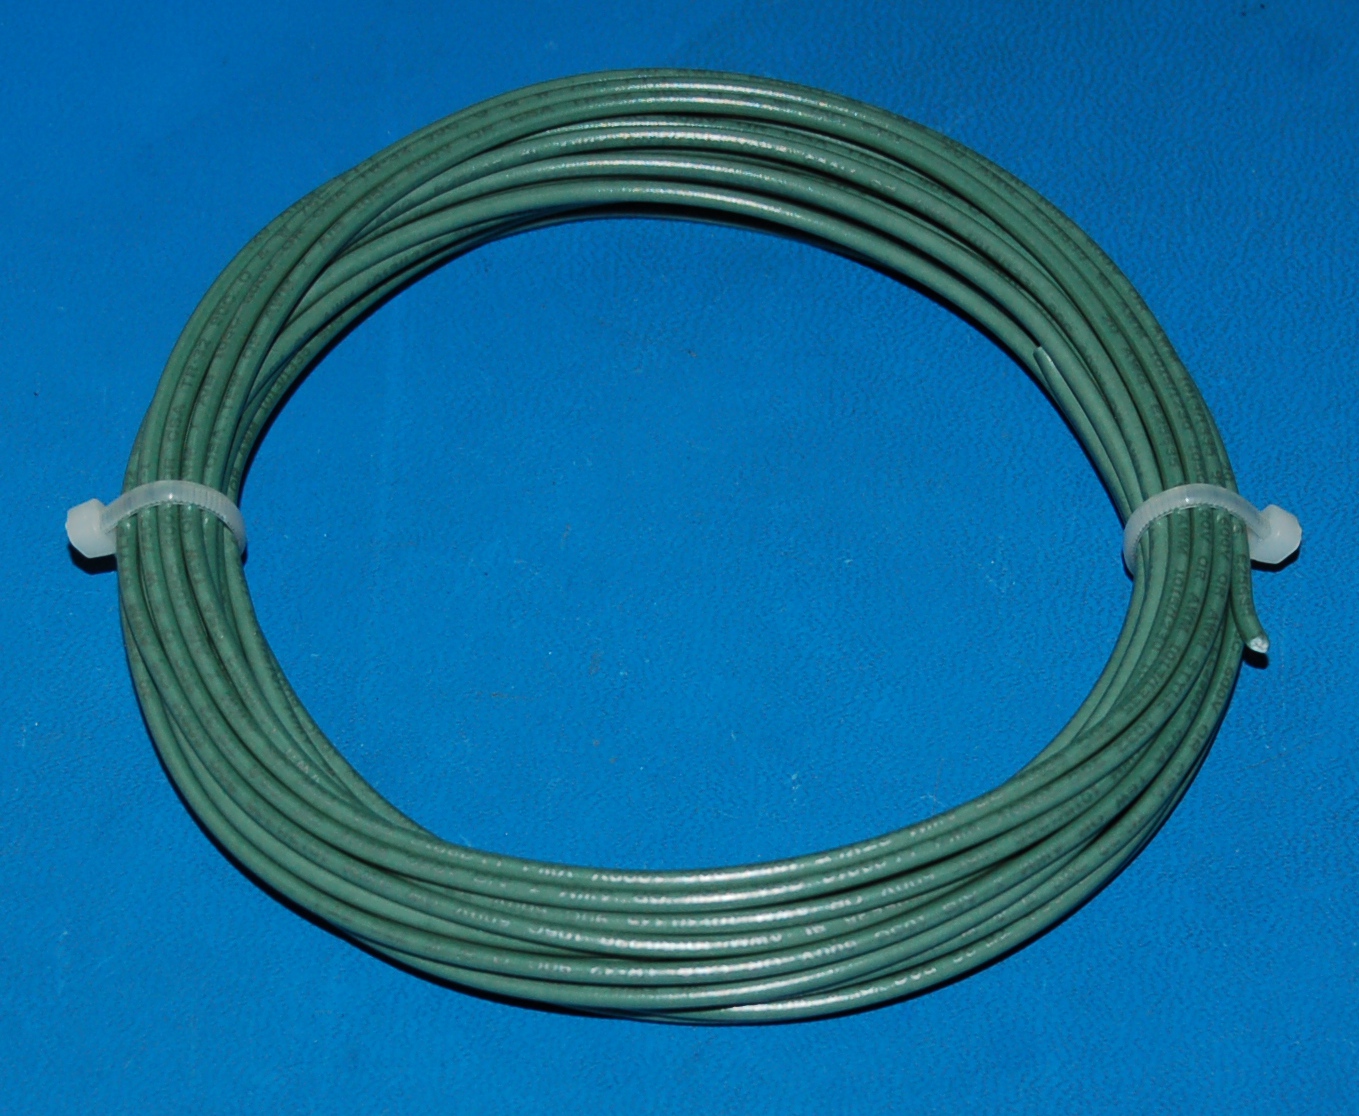 Solid Tinned Copper Wire, 1000V, #20 AWG x 25' (Green)